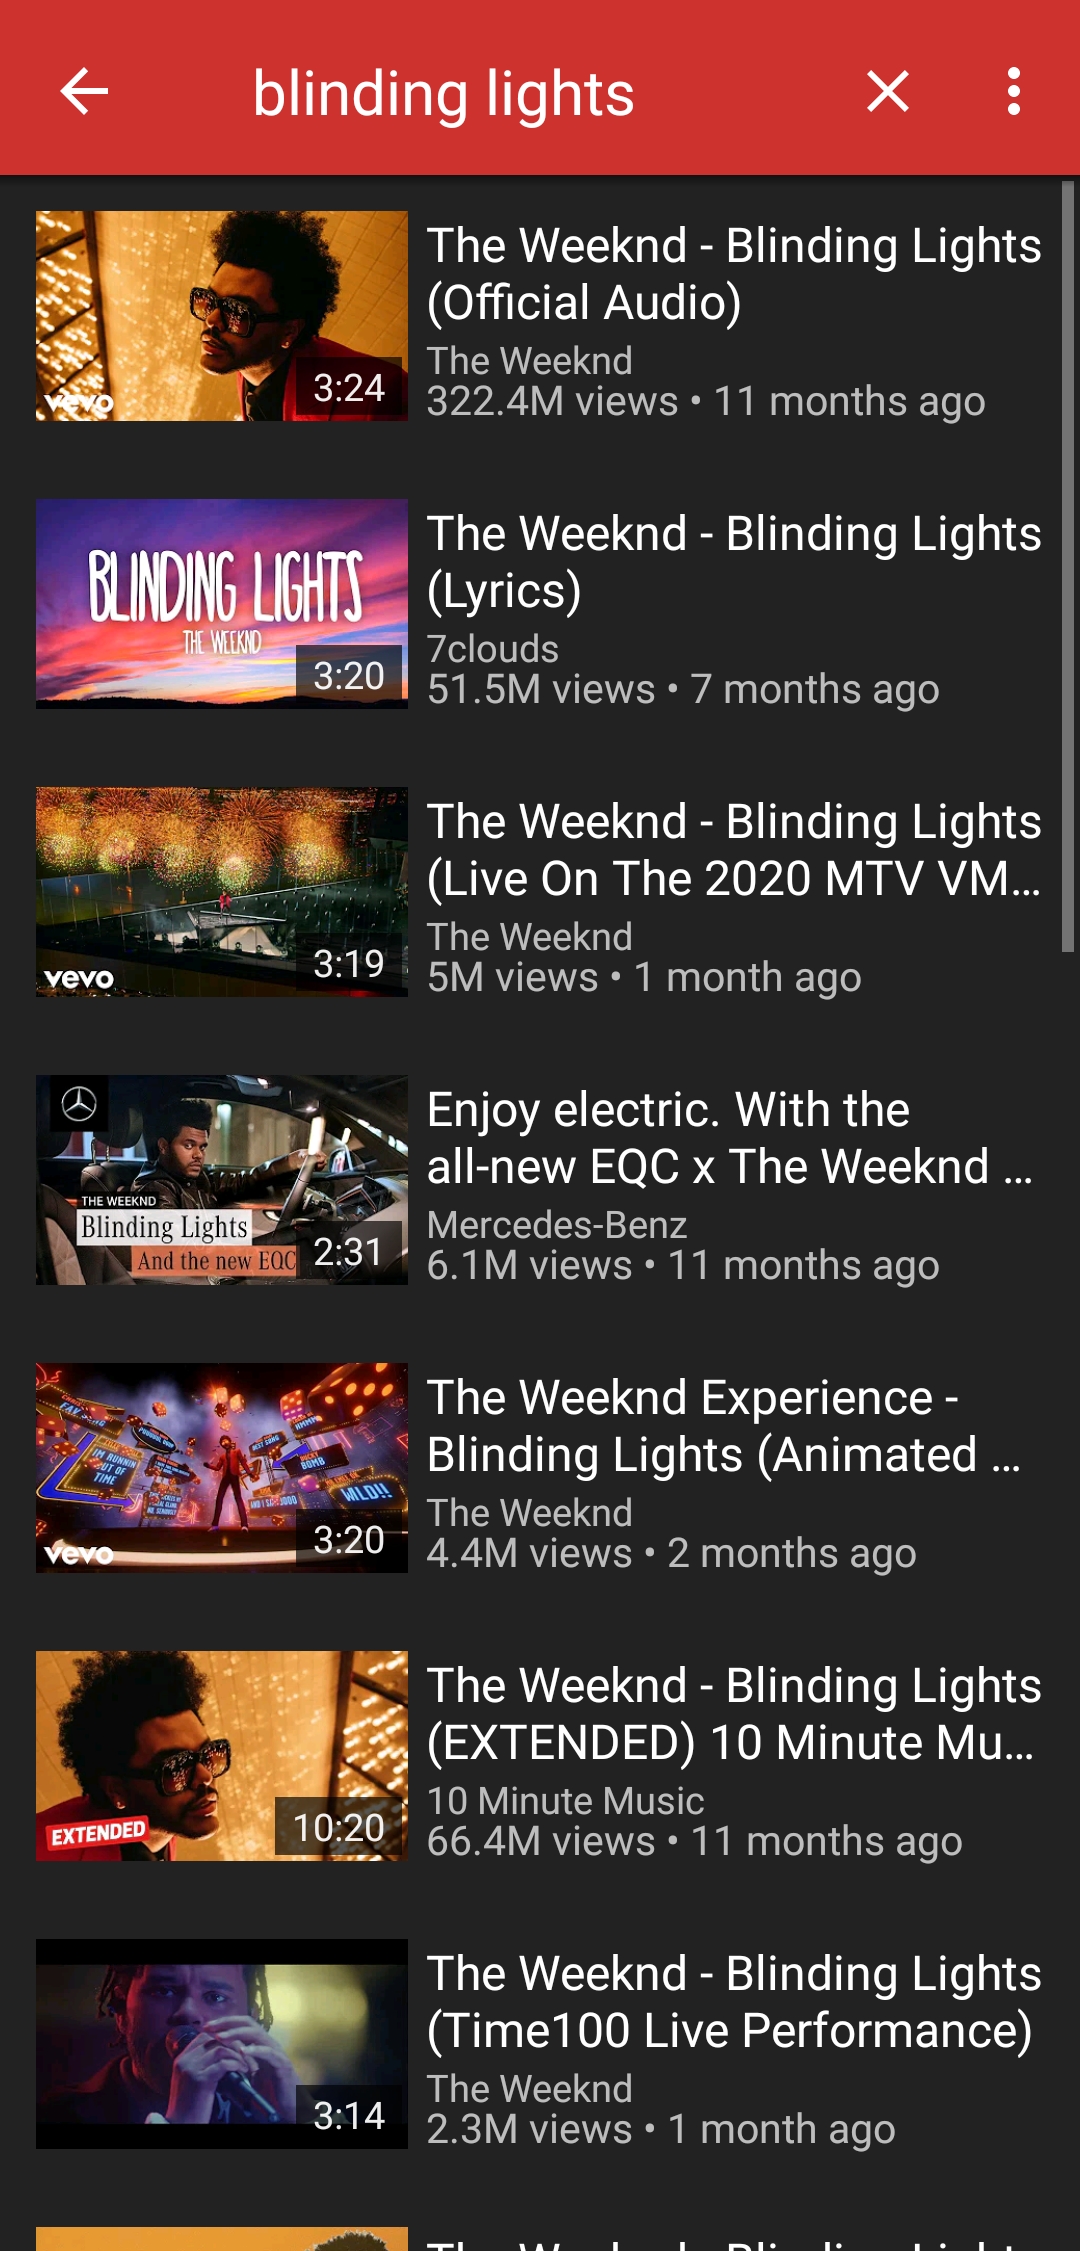 Download The Weeknd - Blinding Lights (Official Music Video) Mp3 (04:23 Min) - Free Full Download All Music